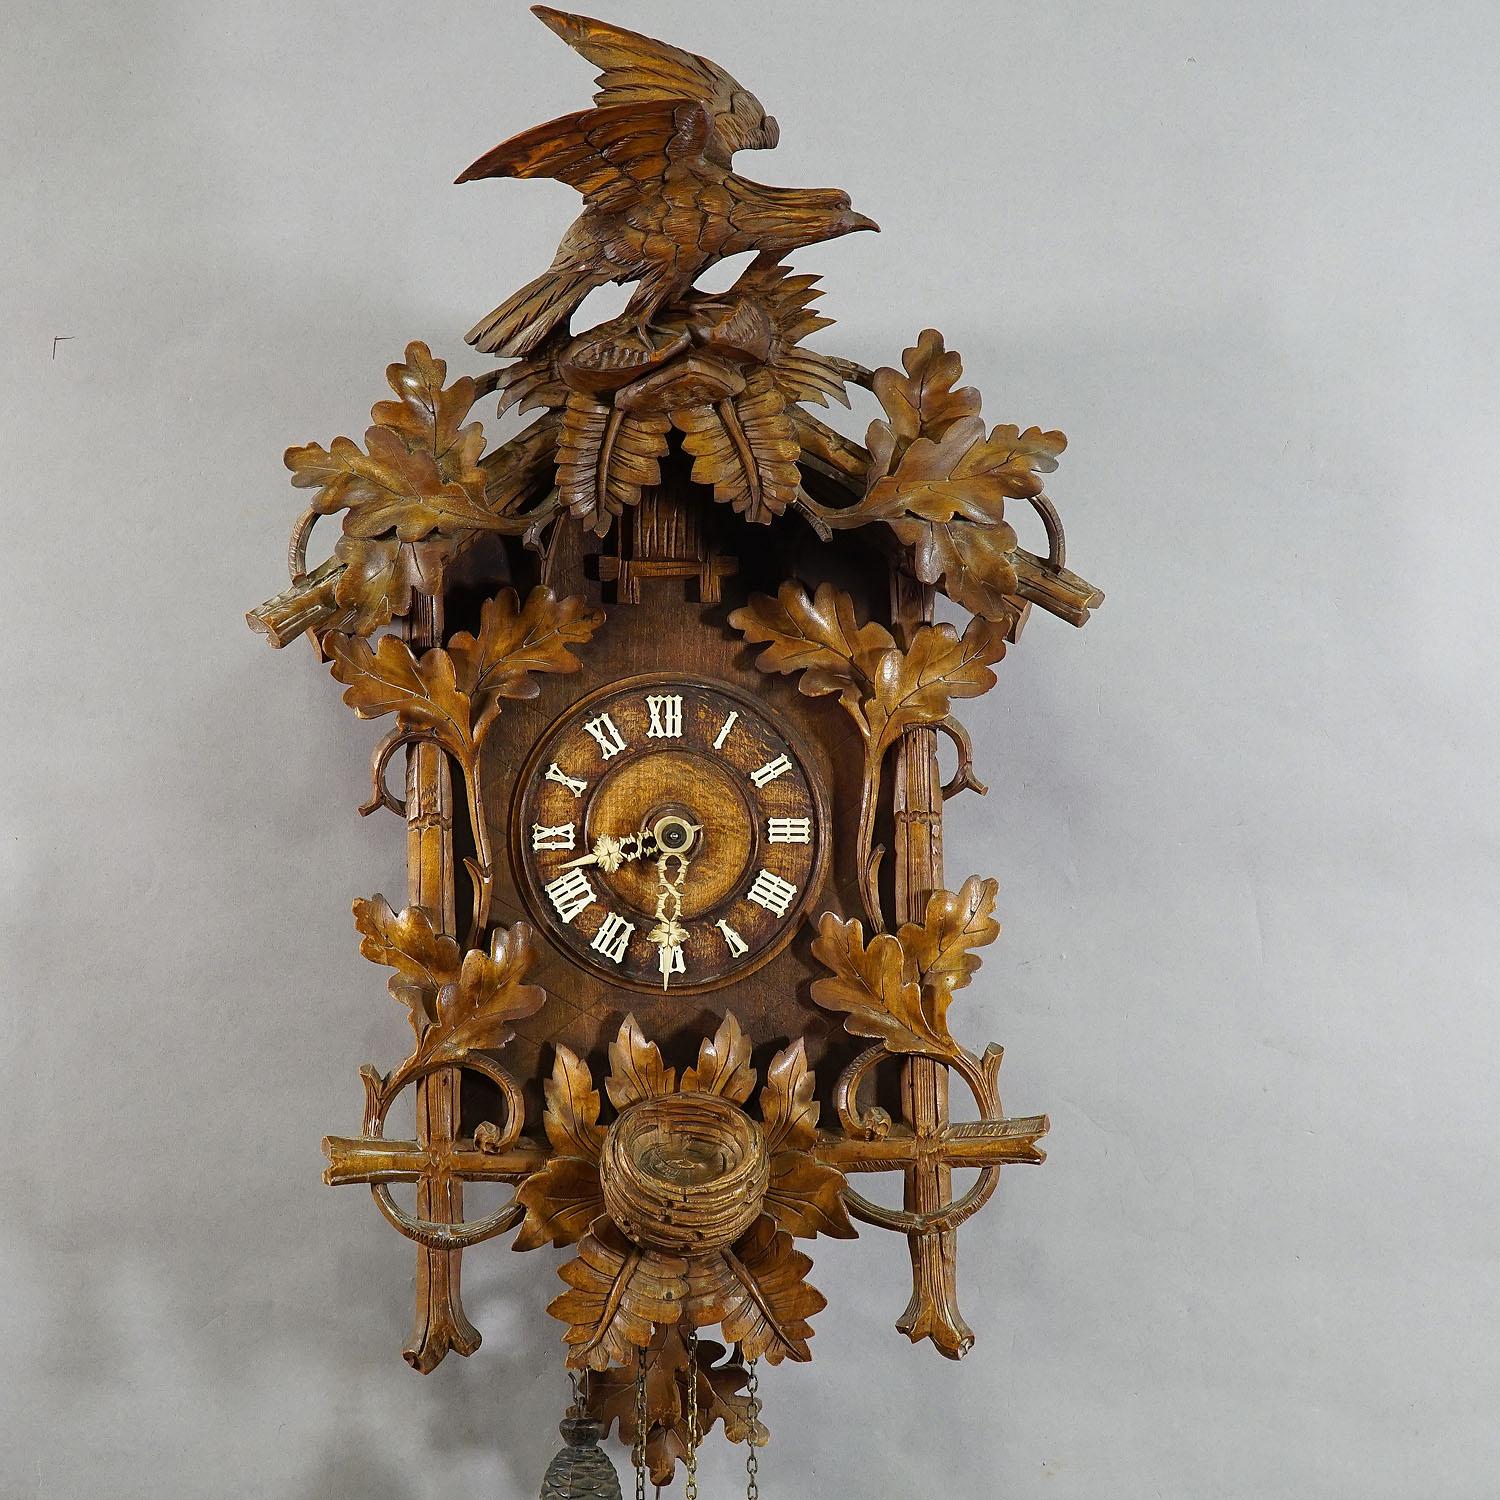 A detailed hand carved wooden cuckoo clock, decorated with oak leaves, birds nest and a large bird on top. Black Forest, Germany, circa 1900. Clockwork in working condition, overworked by a clockmaker.

Measures: Width 14.96